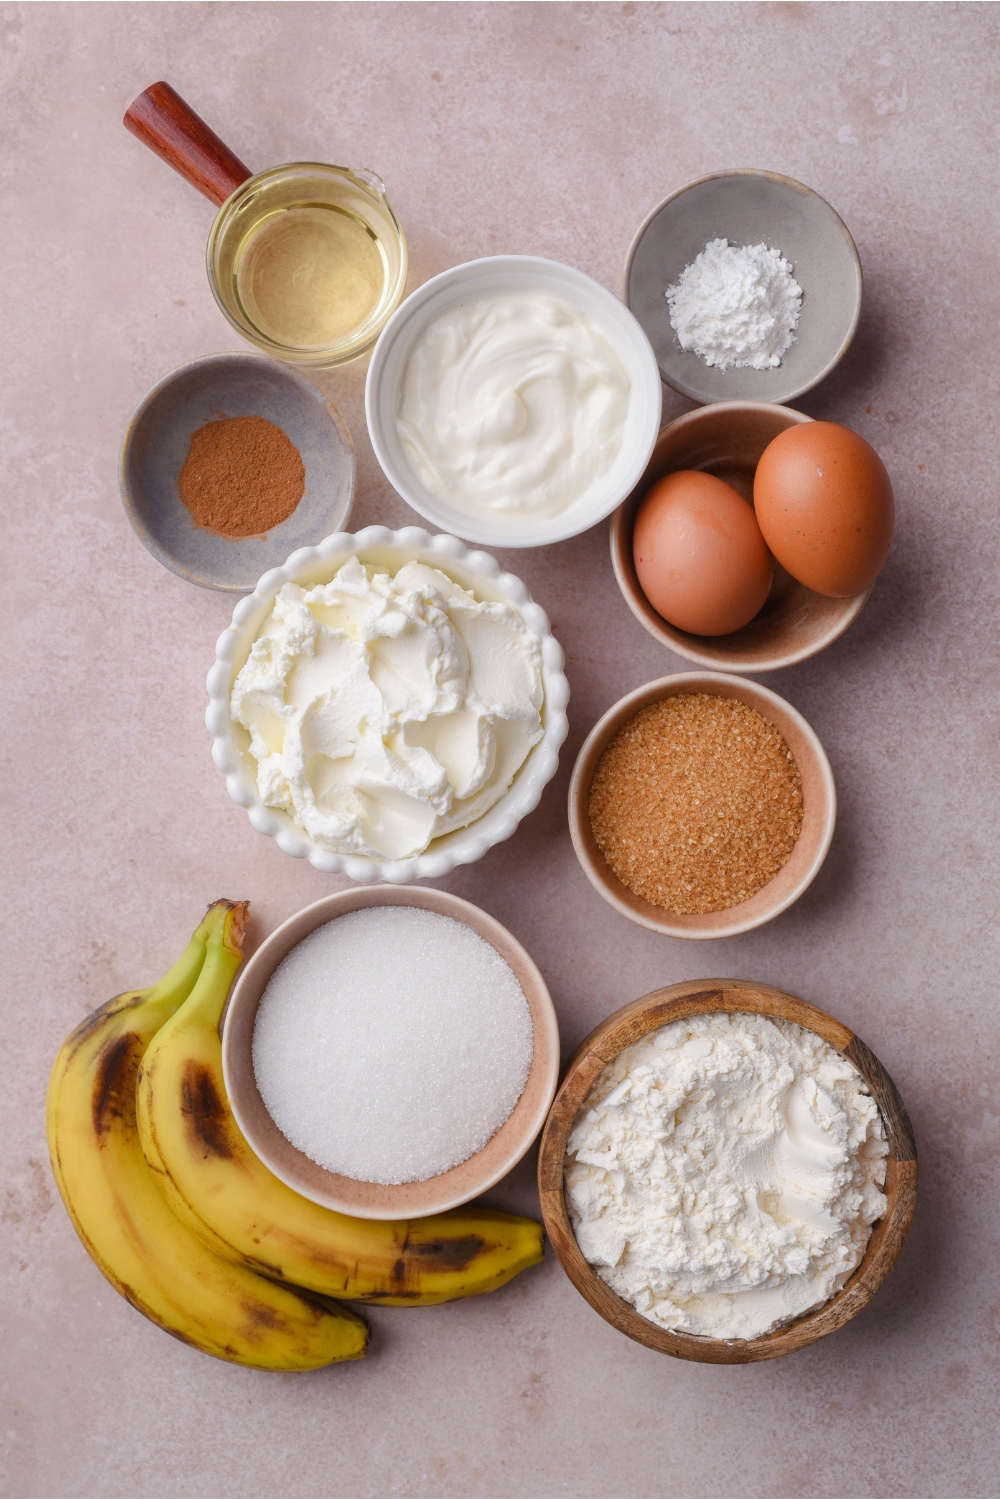 An assortment of ingredients including bowls of cream cheese, sugar, brown sugar, flour, baking soda, two eggs, oil, cinnamon, and two bananas.